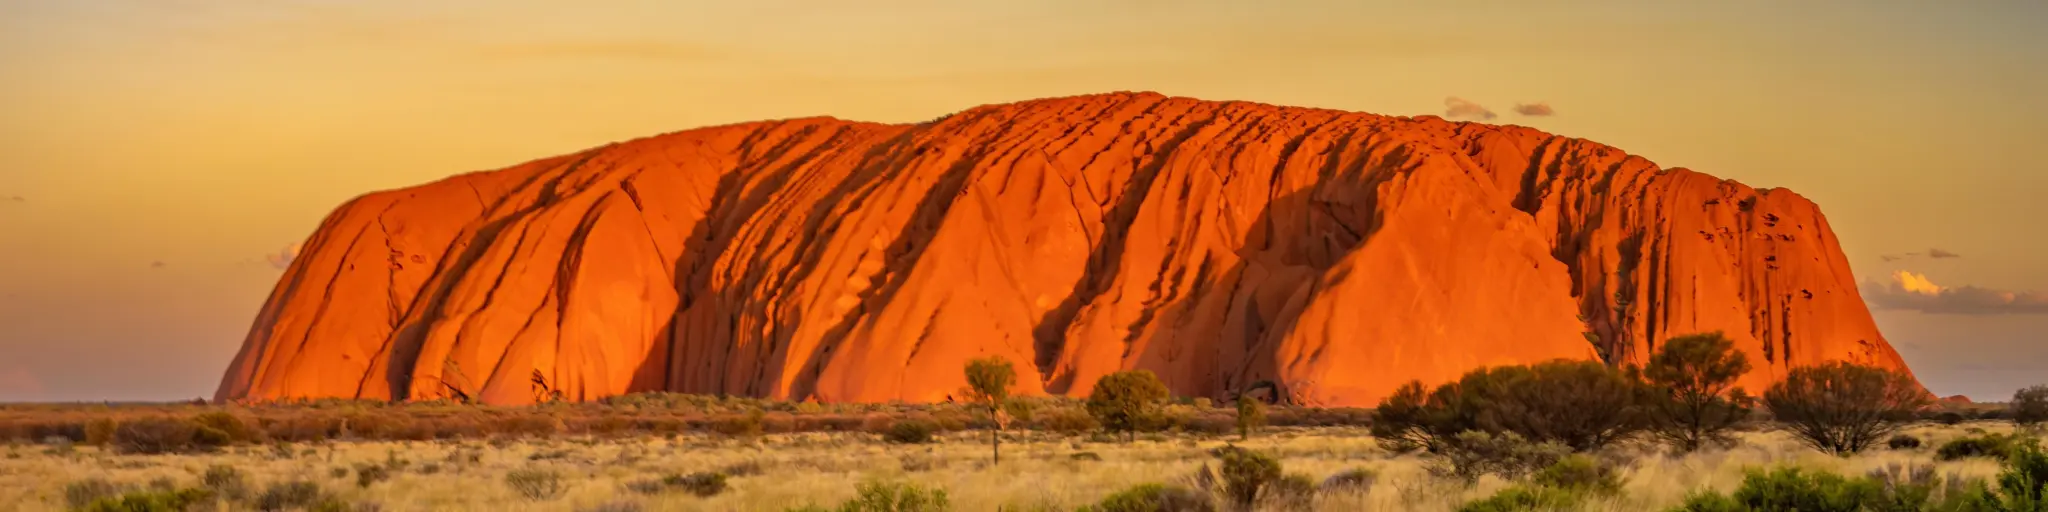 The iconic sandstone rock during an orange-blue sunset